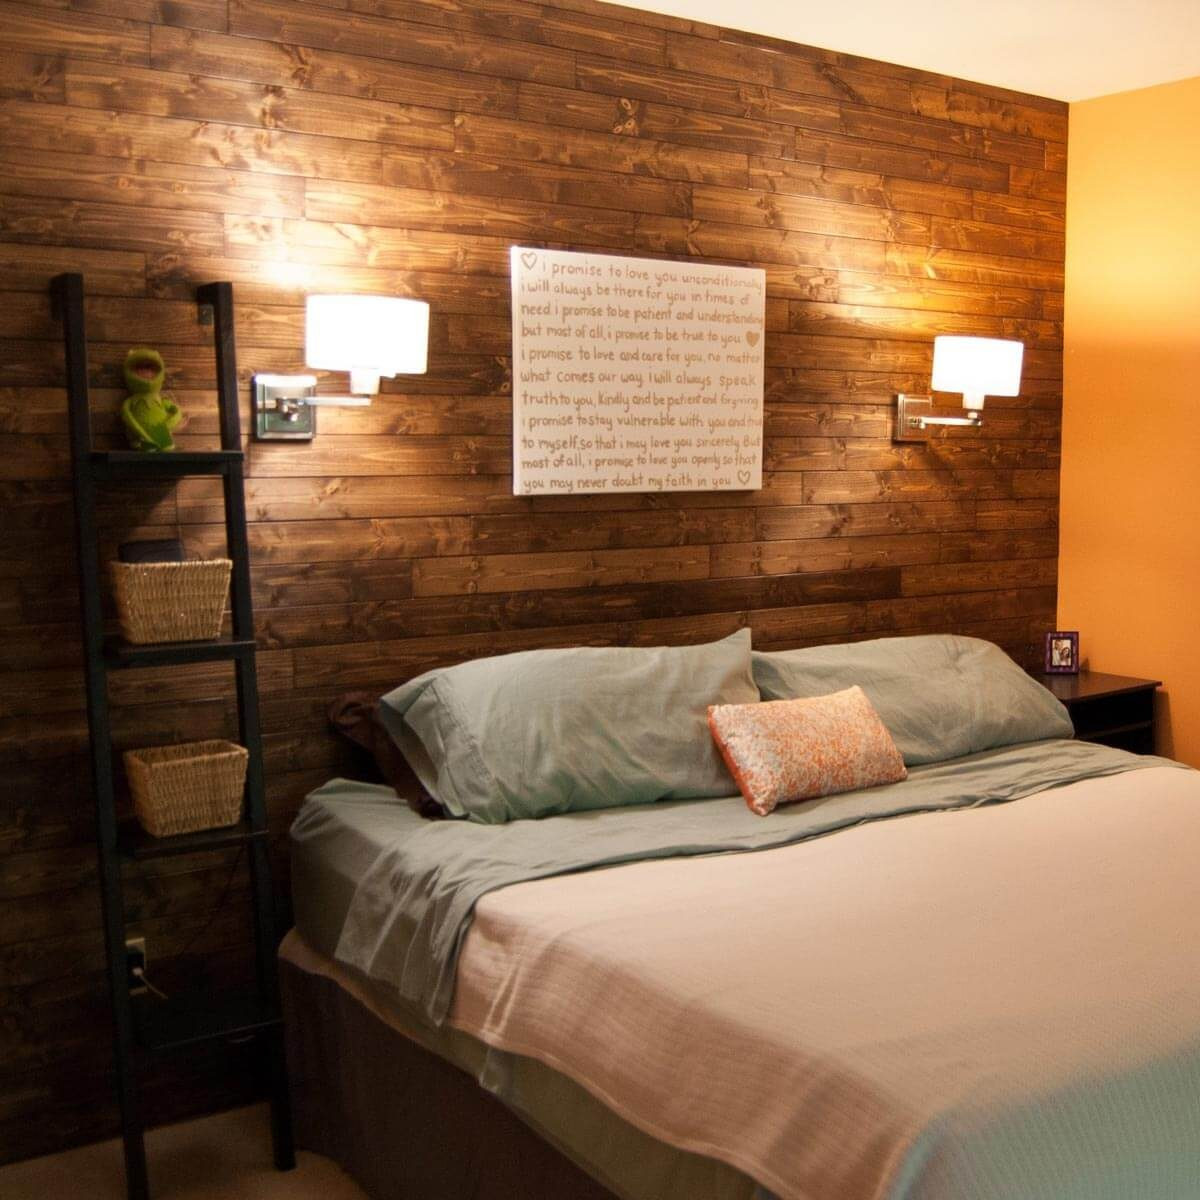 Wall Mounted Lights For Bedroom
 12 Ingenious Bedroom Furniture Ideas — The Family Handyman